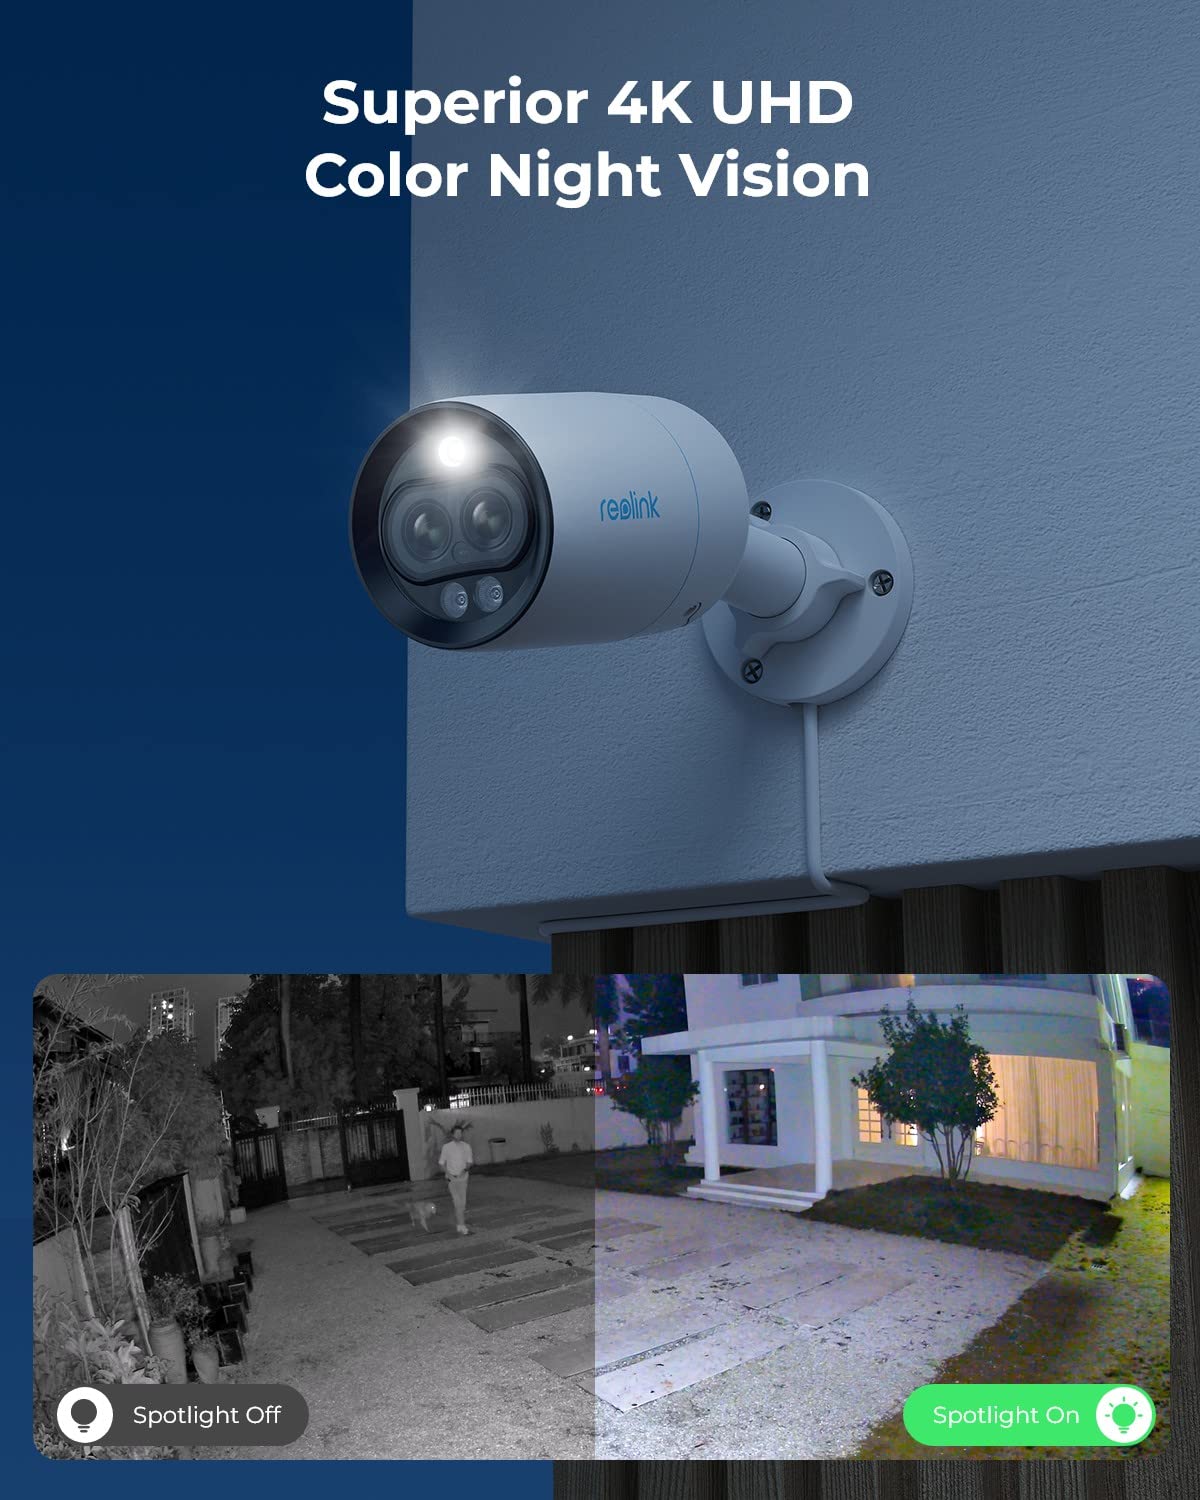 REOLINK Dual View PoE Camera - IP Security Camera System with 1x 4K Wide-Angle Lens and 1x 3MP Telephoto Lens for A Close-up, AI Detection, Color Night Vision, Two-Way Talk, RLC-81MA